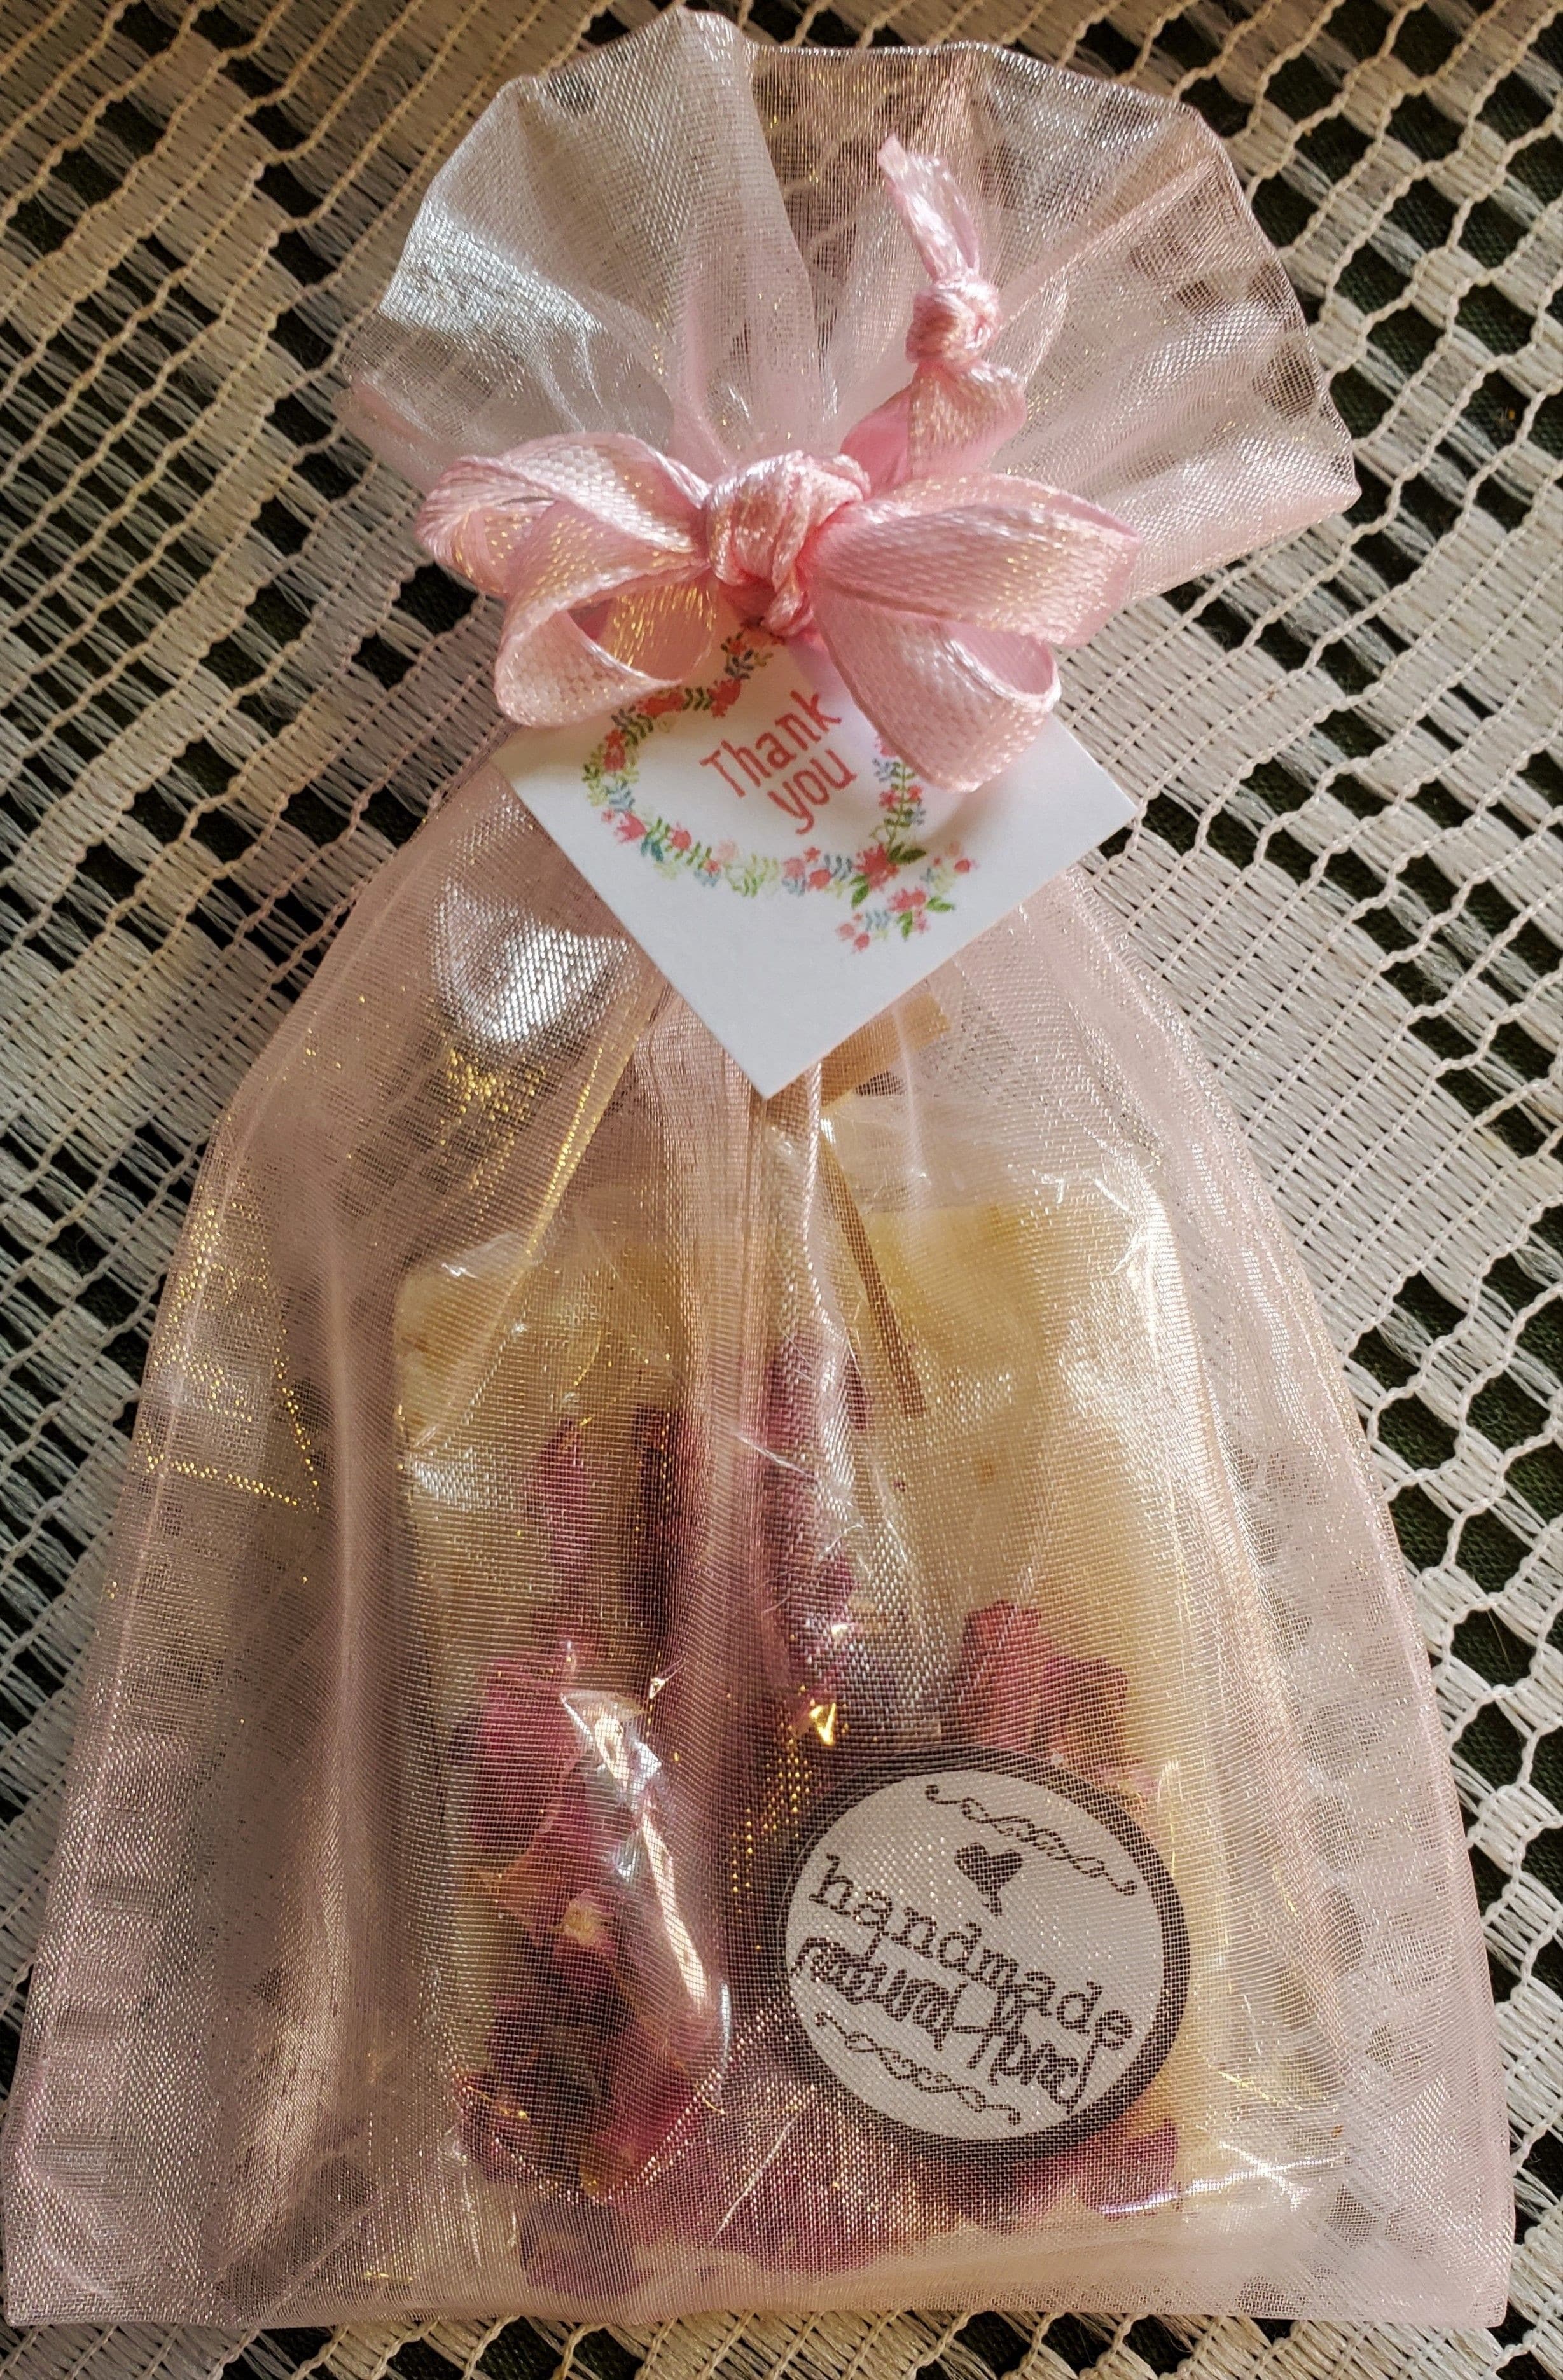 This premium soap favour is a beautiful blend of natural floral essential oils decorated with organic rose petals.  A beautiful and useful fragrant gift.